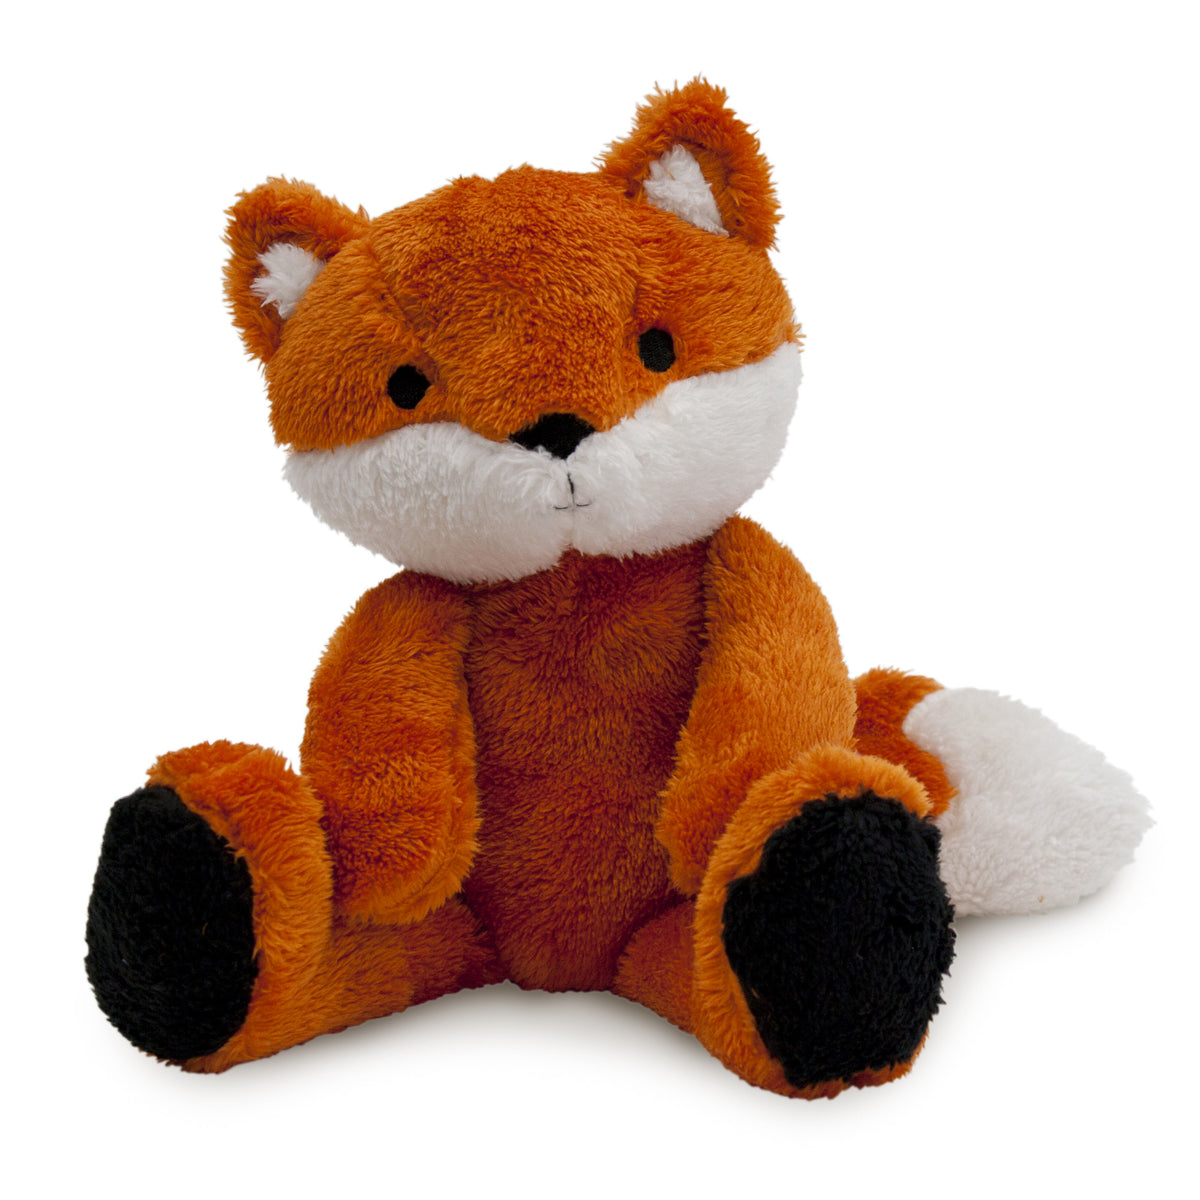 Purchase Stuffed Animals & Plush Toys For Your Baby - Lambs & Ivy